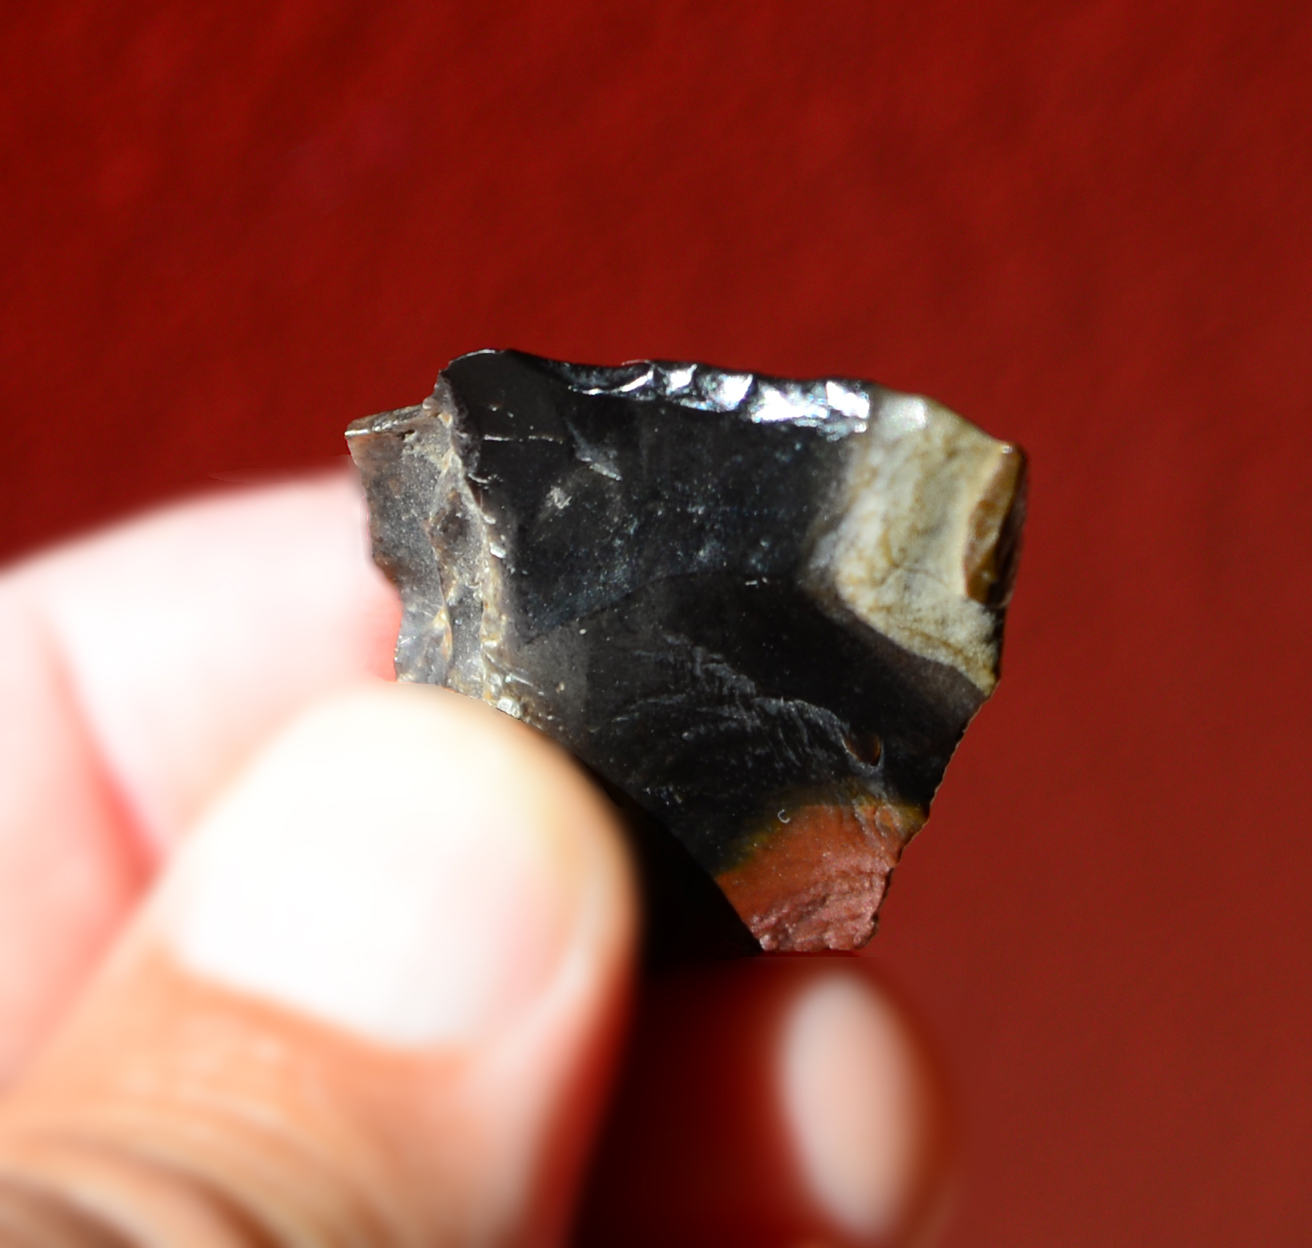 A small stone tool held in close up